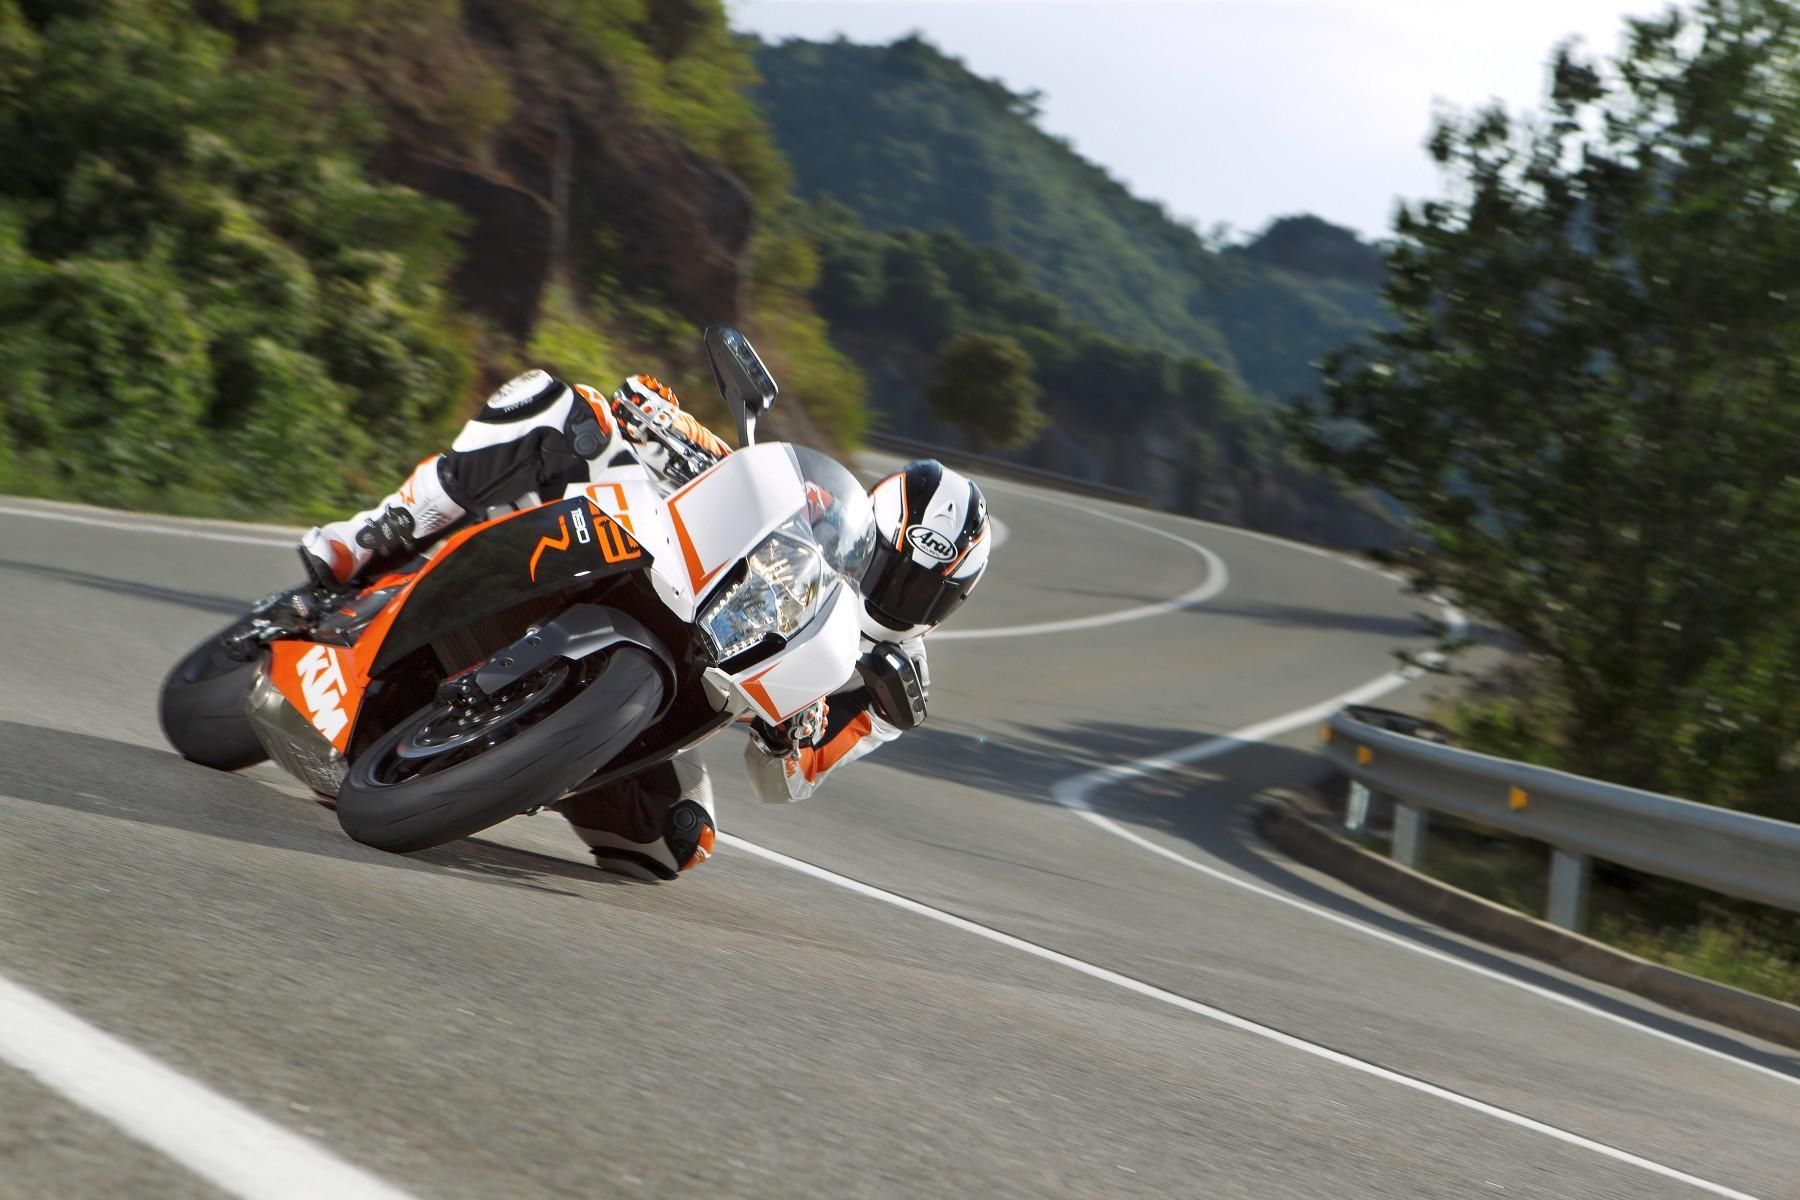 2013 KTM 1190 RC8 R in action 1